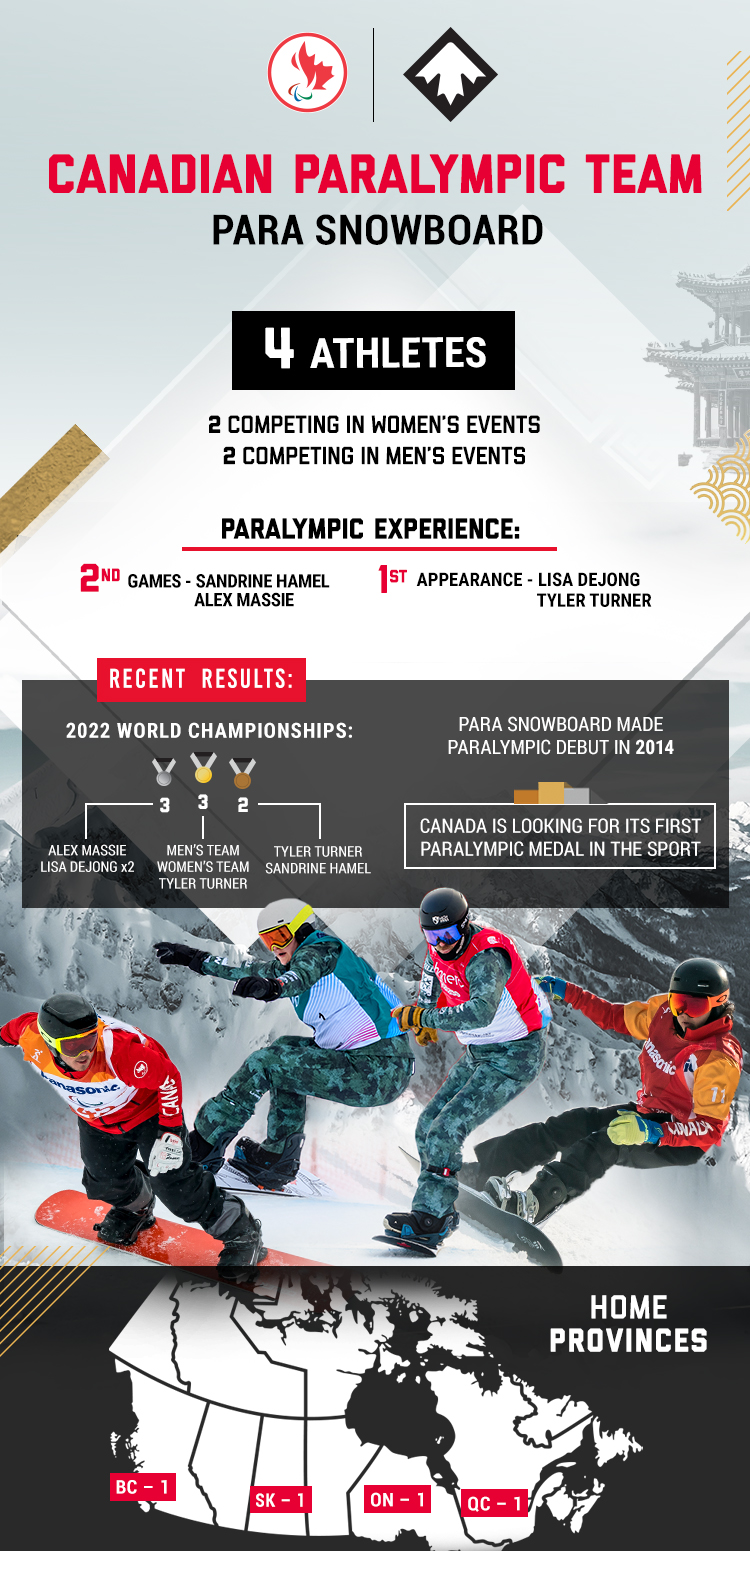 An infographic showing stats about Canada's Para snowboard team for the Beijing 2022 Paralympic Winter Games